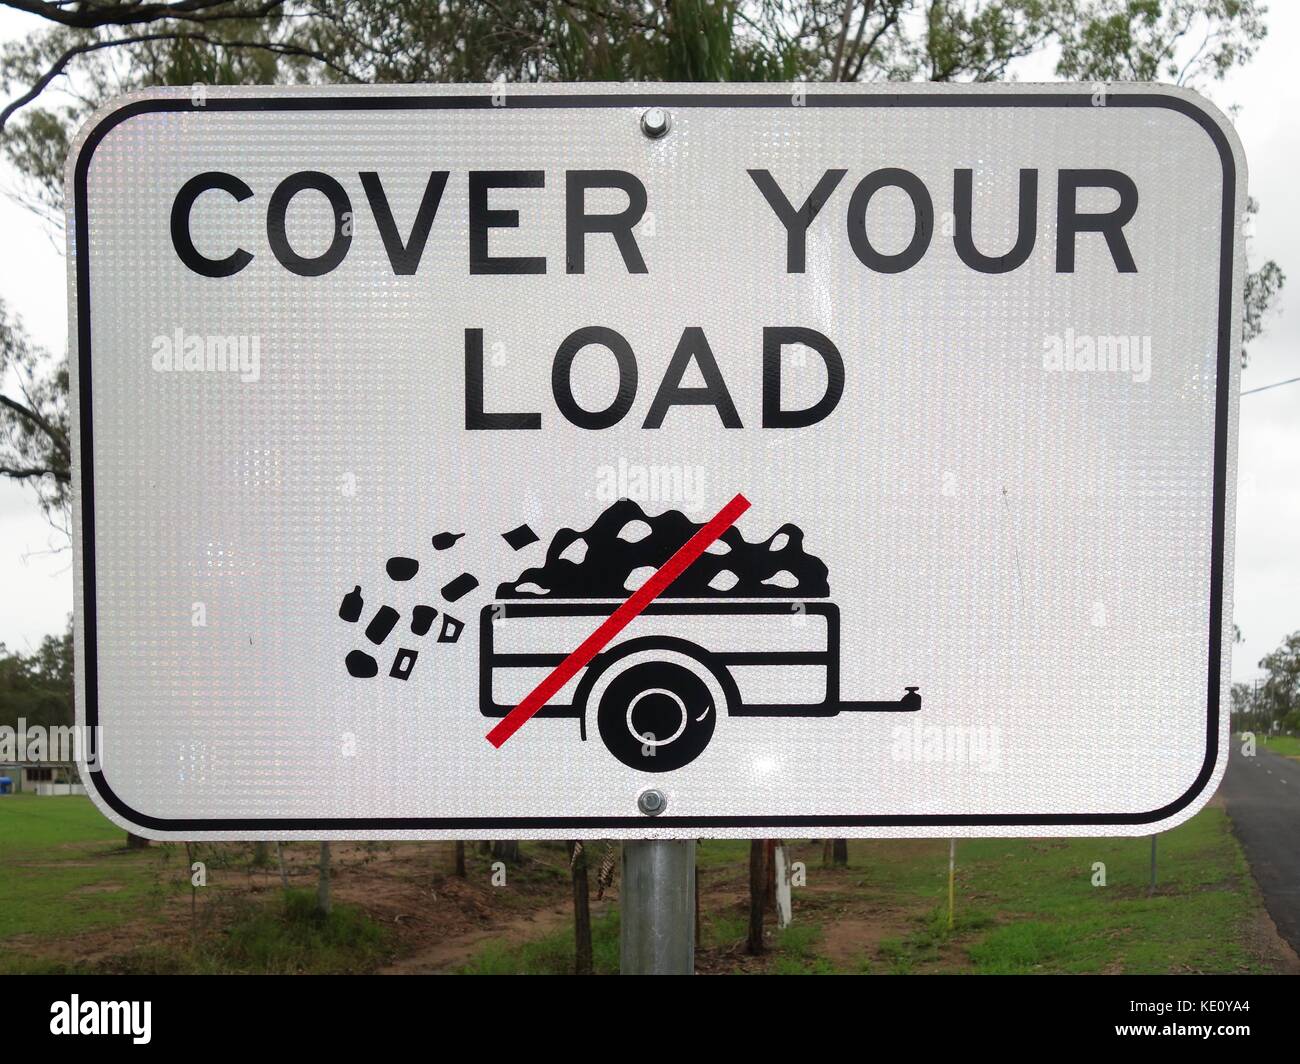 A road sign requiring any trailer being towed by a vehicle to cover its load in Australia Stock Photo